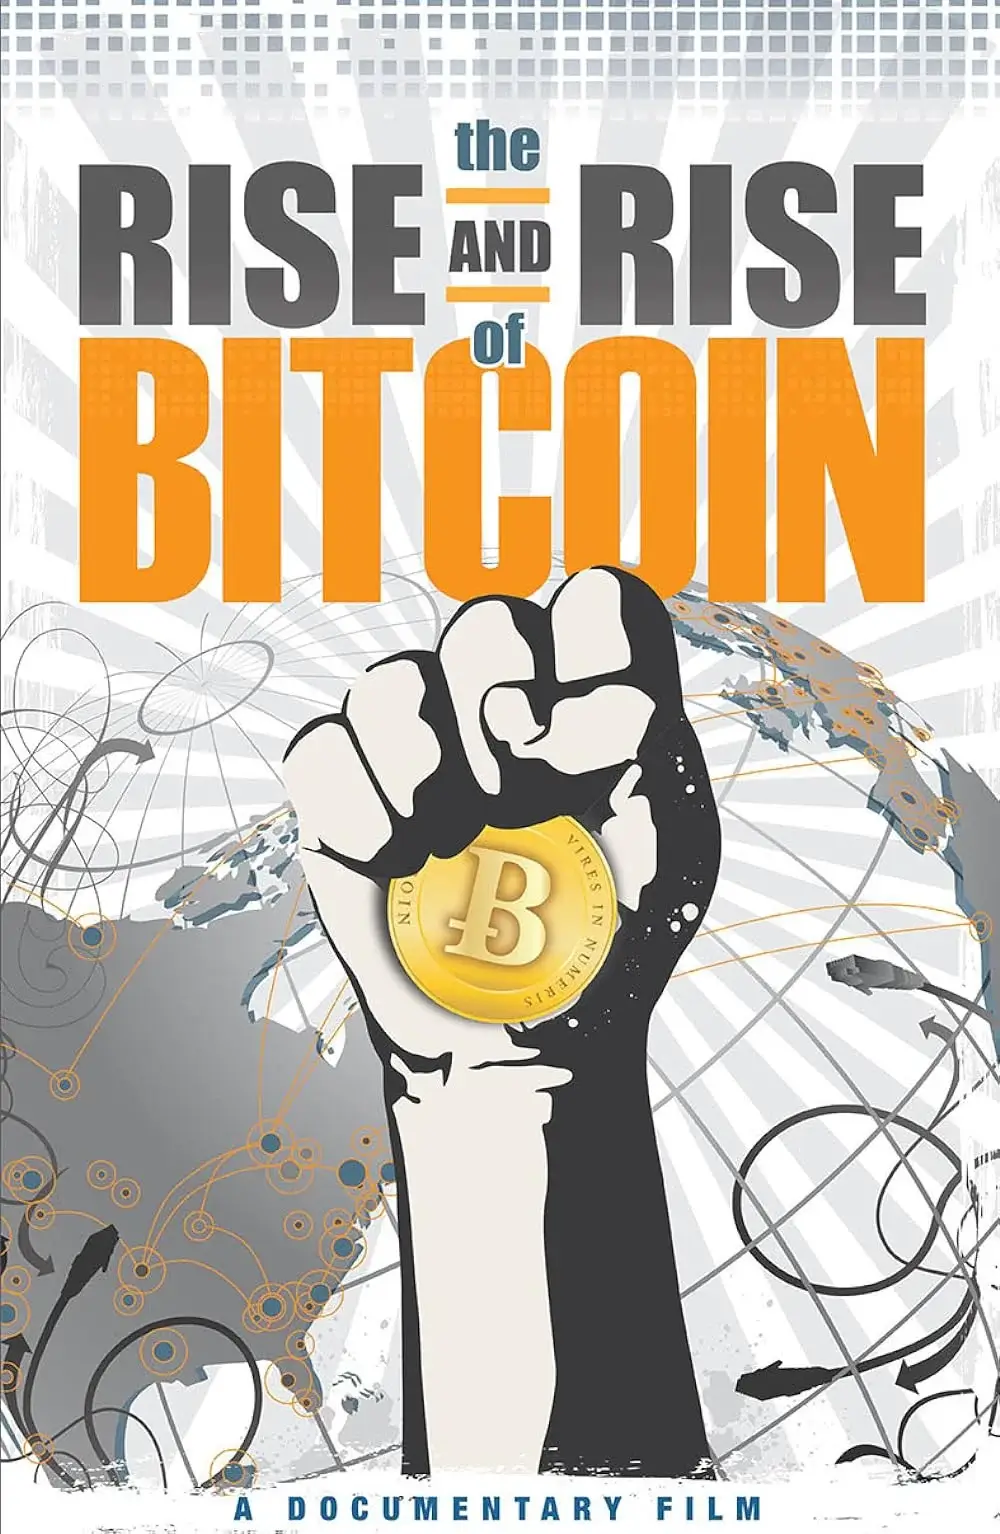 4. The Rise and Rise of Bitcoin